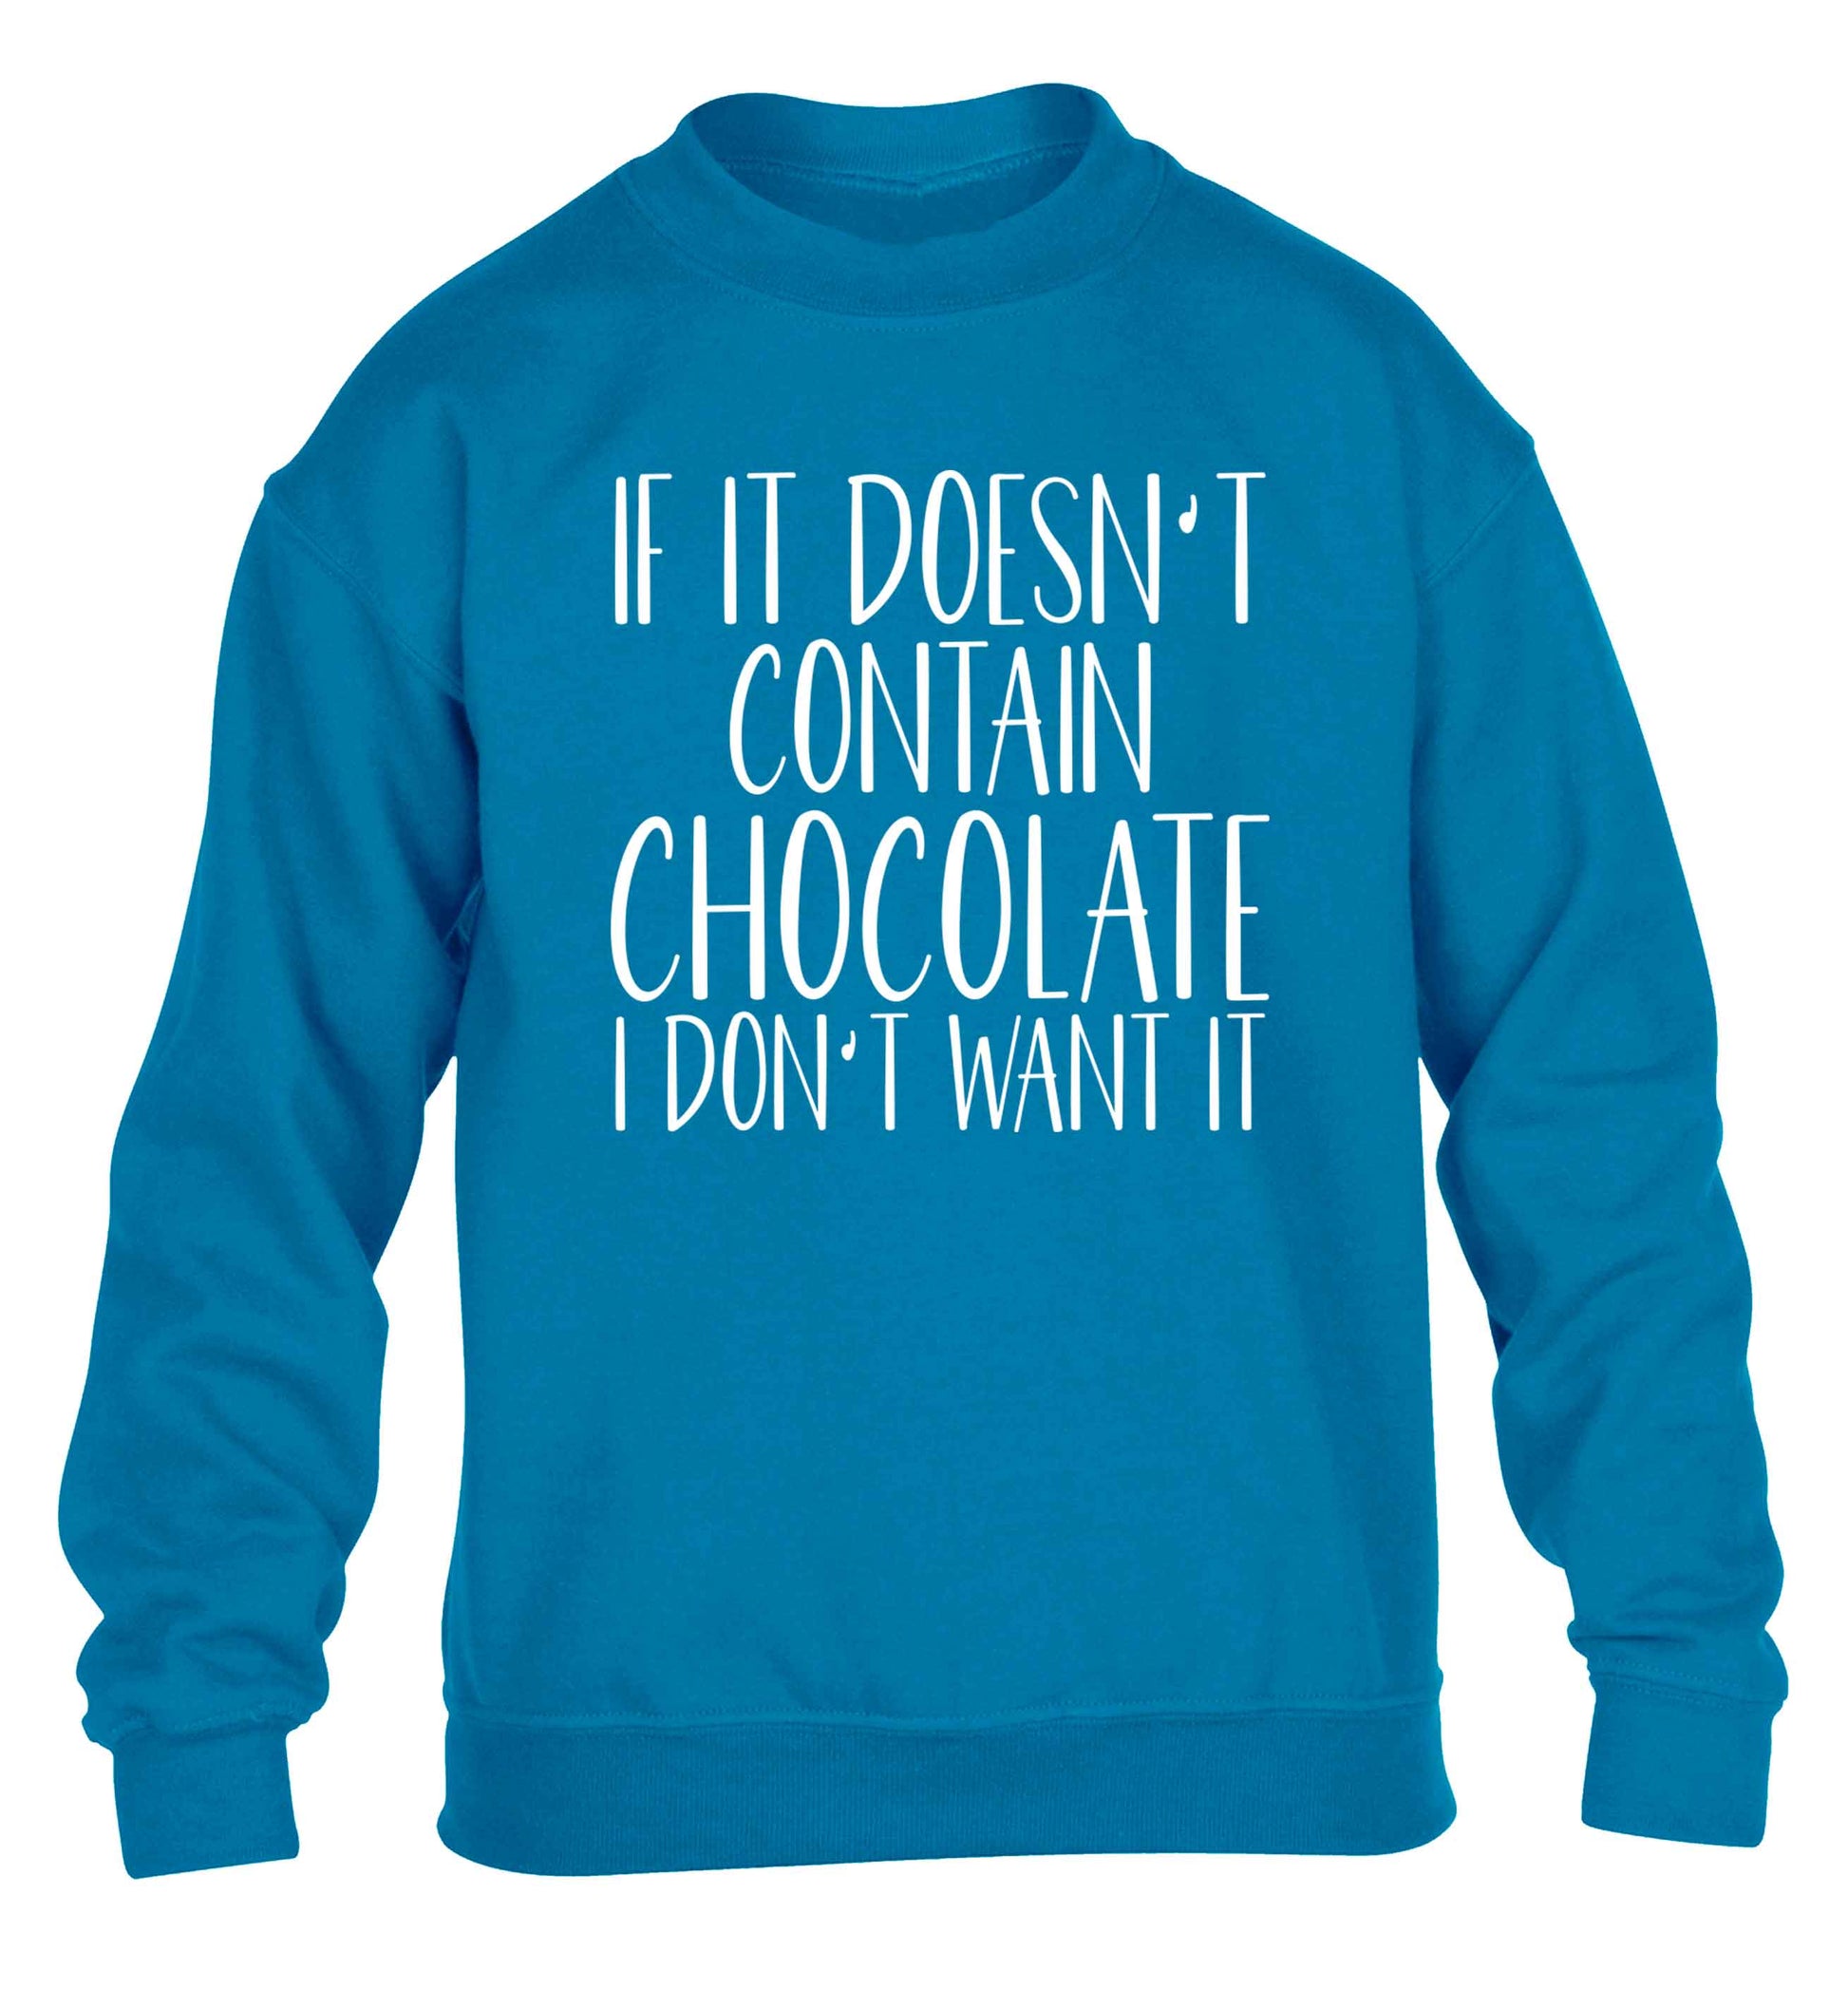 If it doesn't contain chocolate I don't want it children's blue sweater 12-13 Years